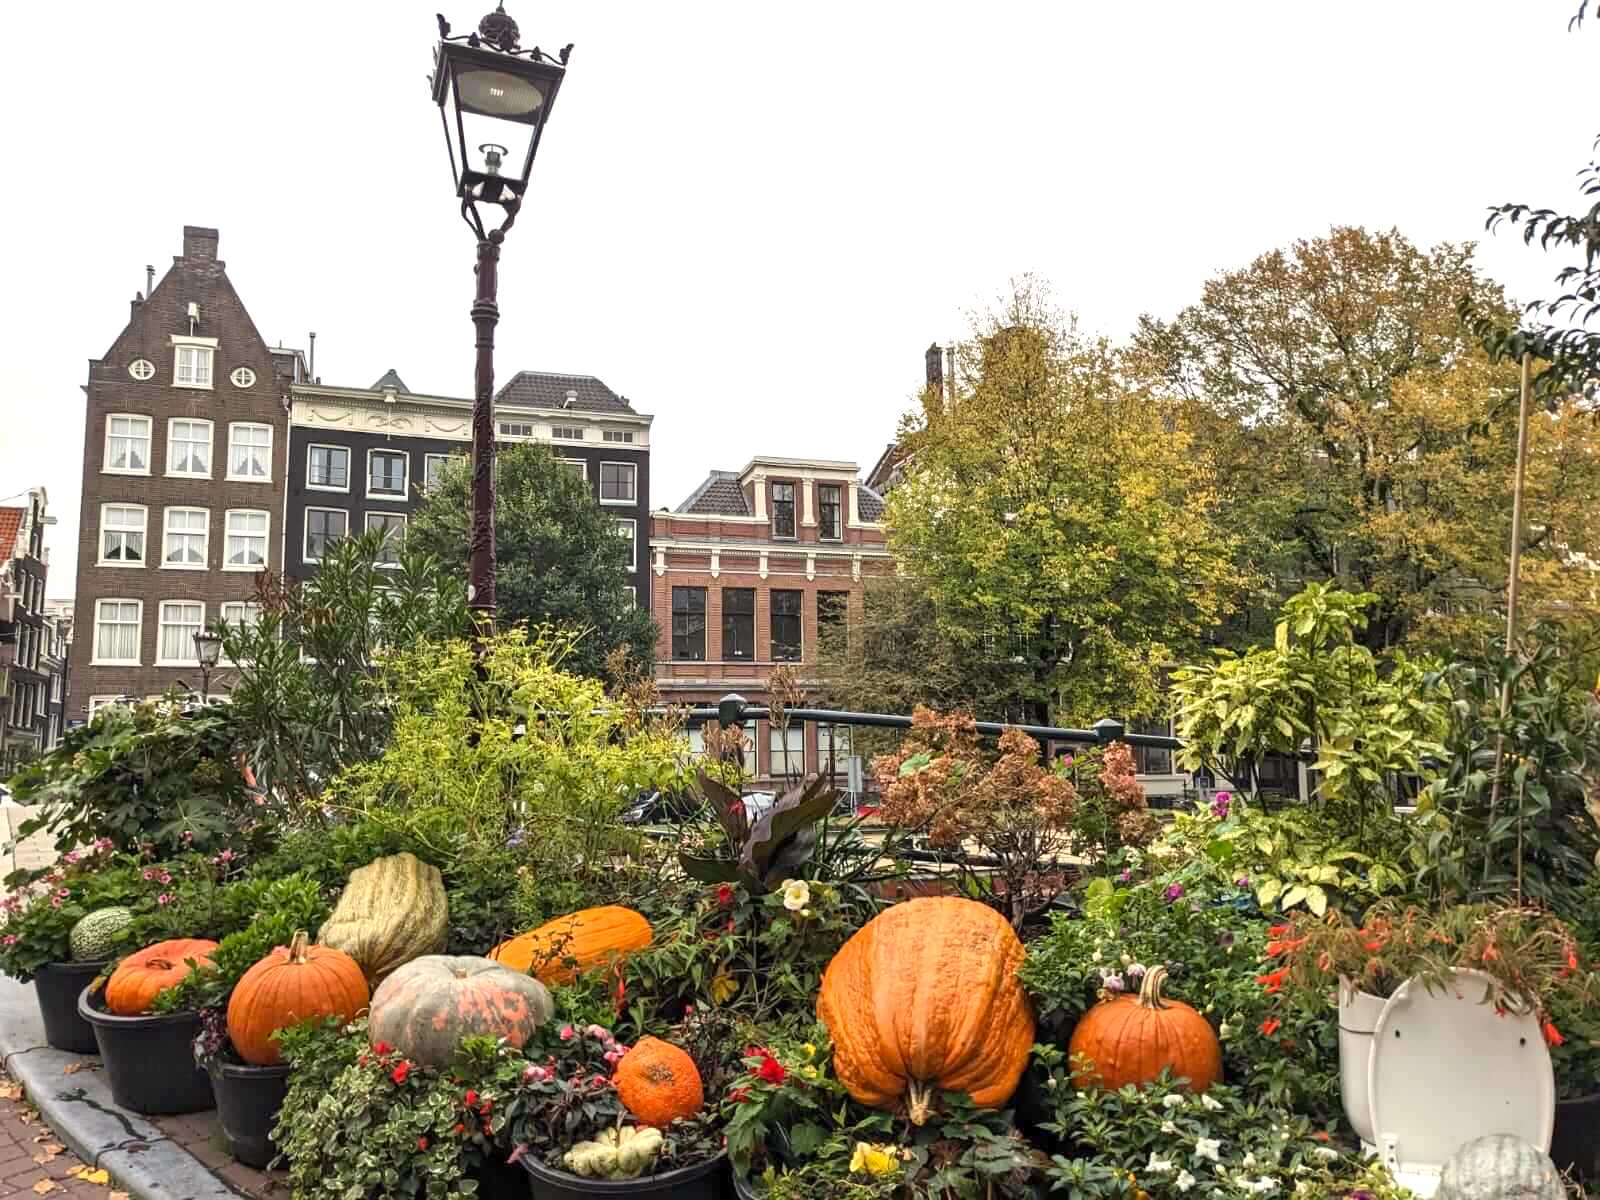 An array of pumpkins of all different shapes and sizes laid out in the street of Amsterdam with the houses and a lantern behind.